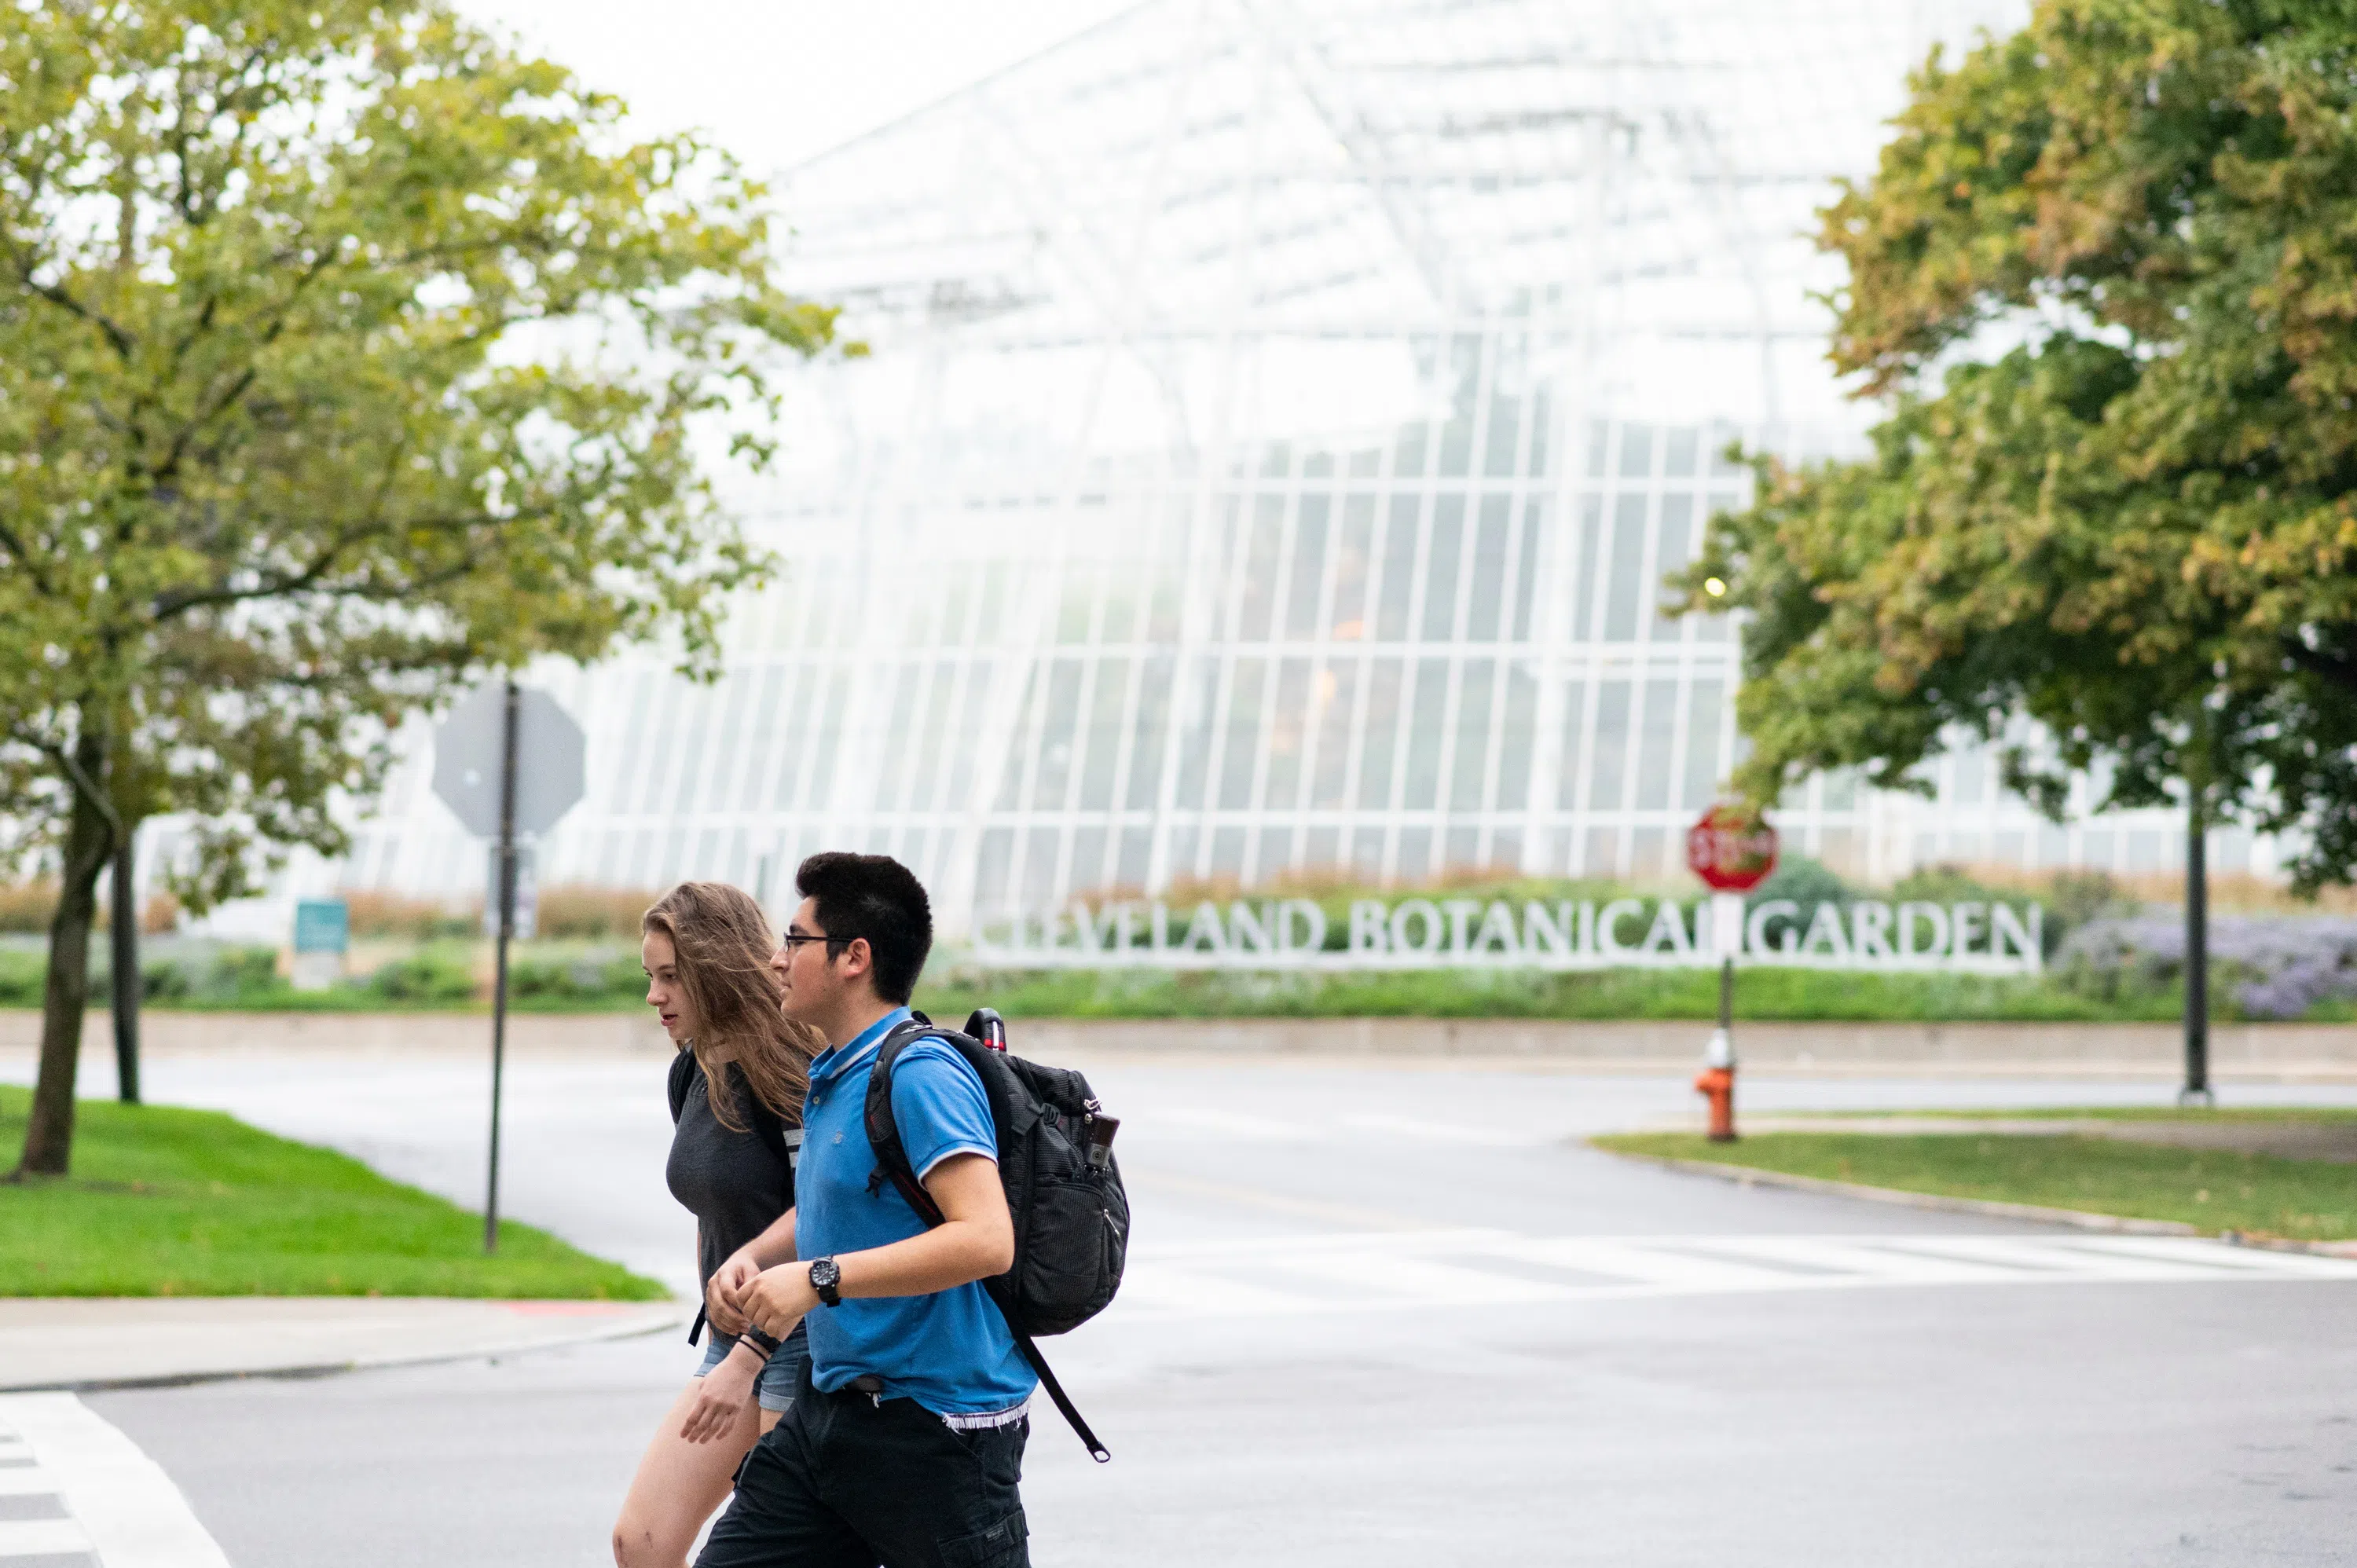 Two students walk in front of the Cleveland Botanical Garden